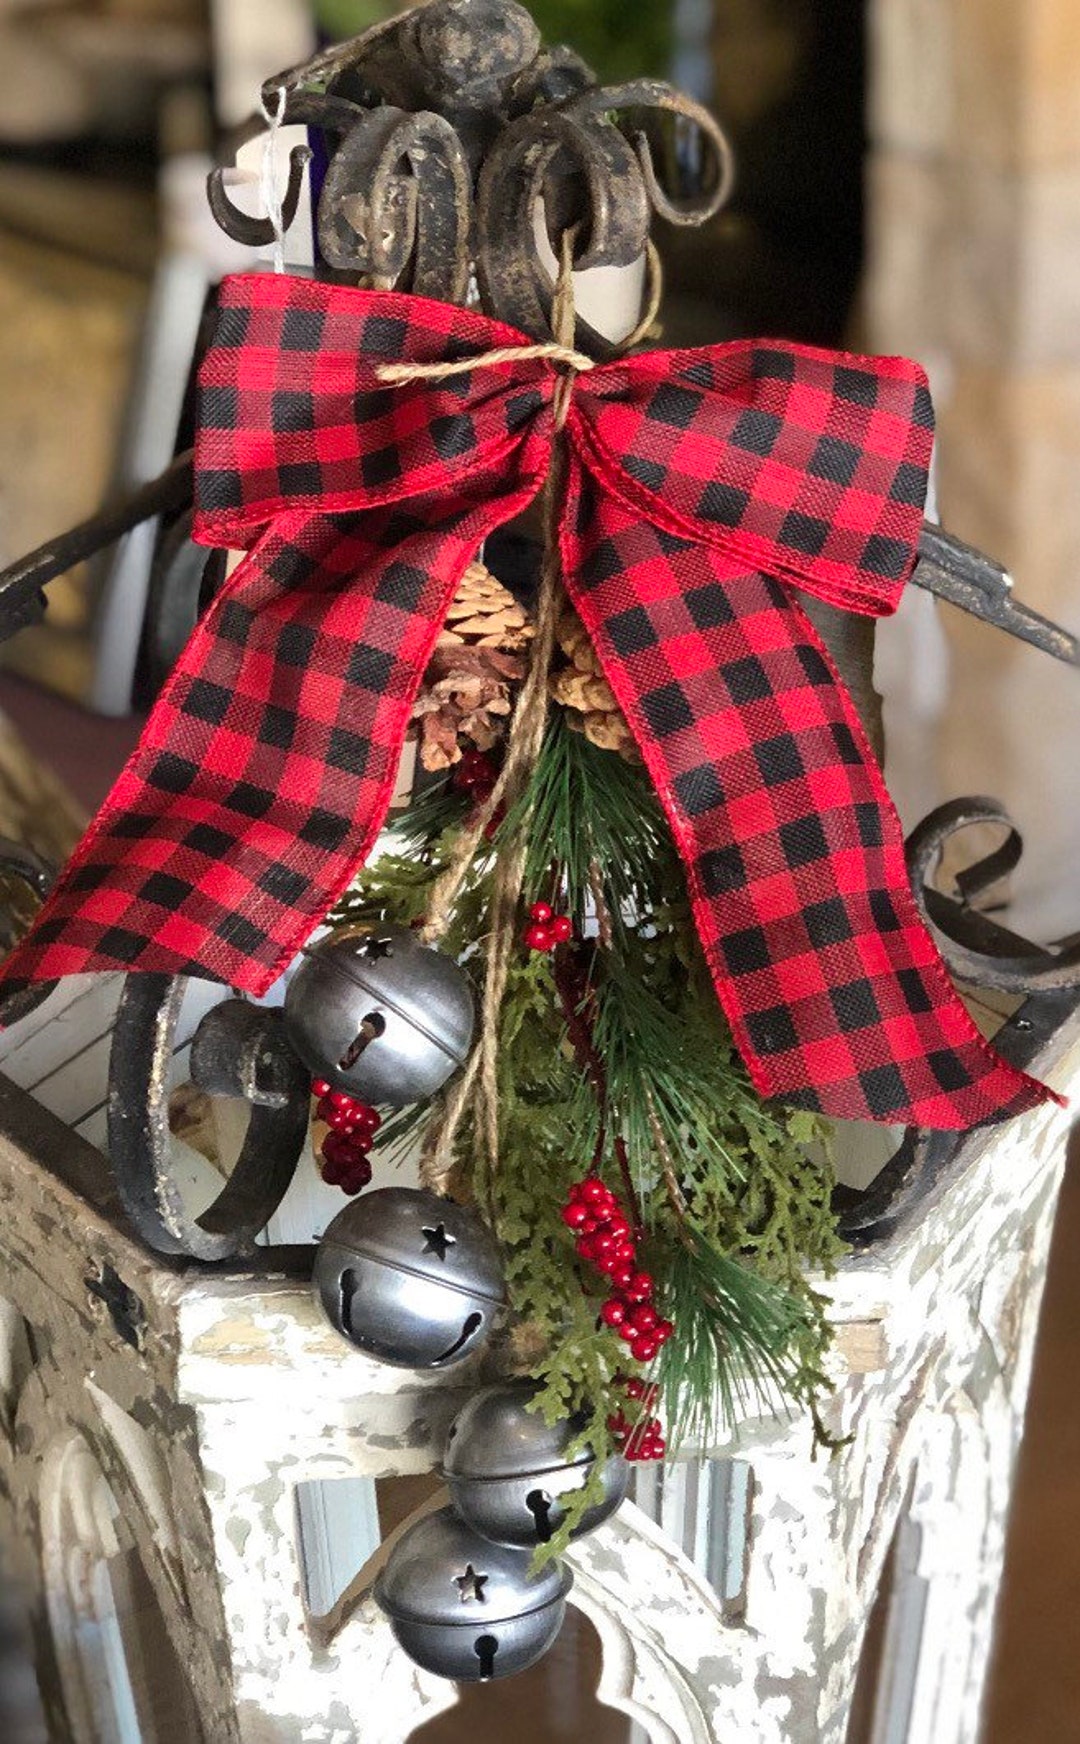 6” Galvanized Bells With Buffalo Check Bow Christmas Ornament